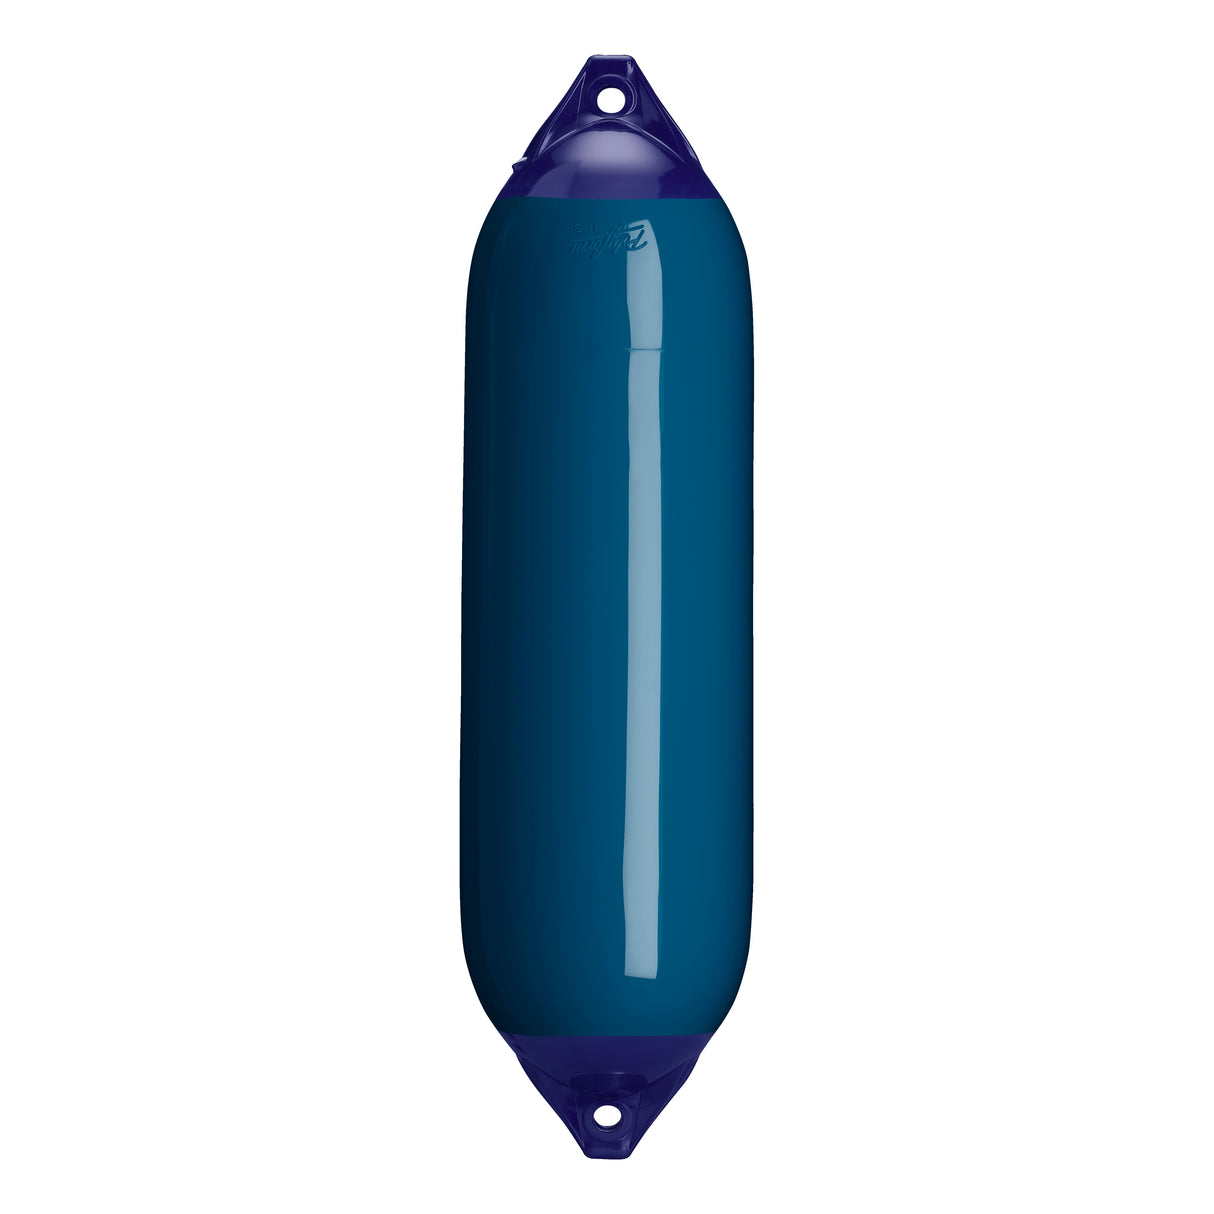 Catalina Blue boat fender with Navy-Top, Polyform F-6 